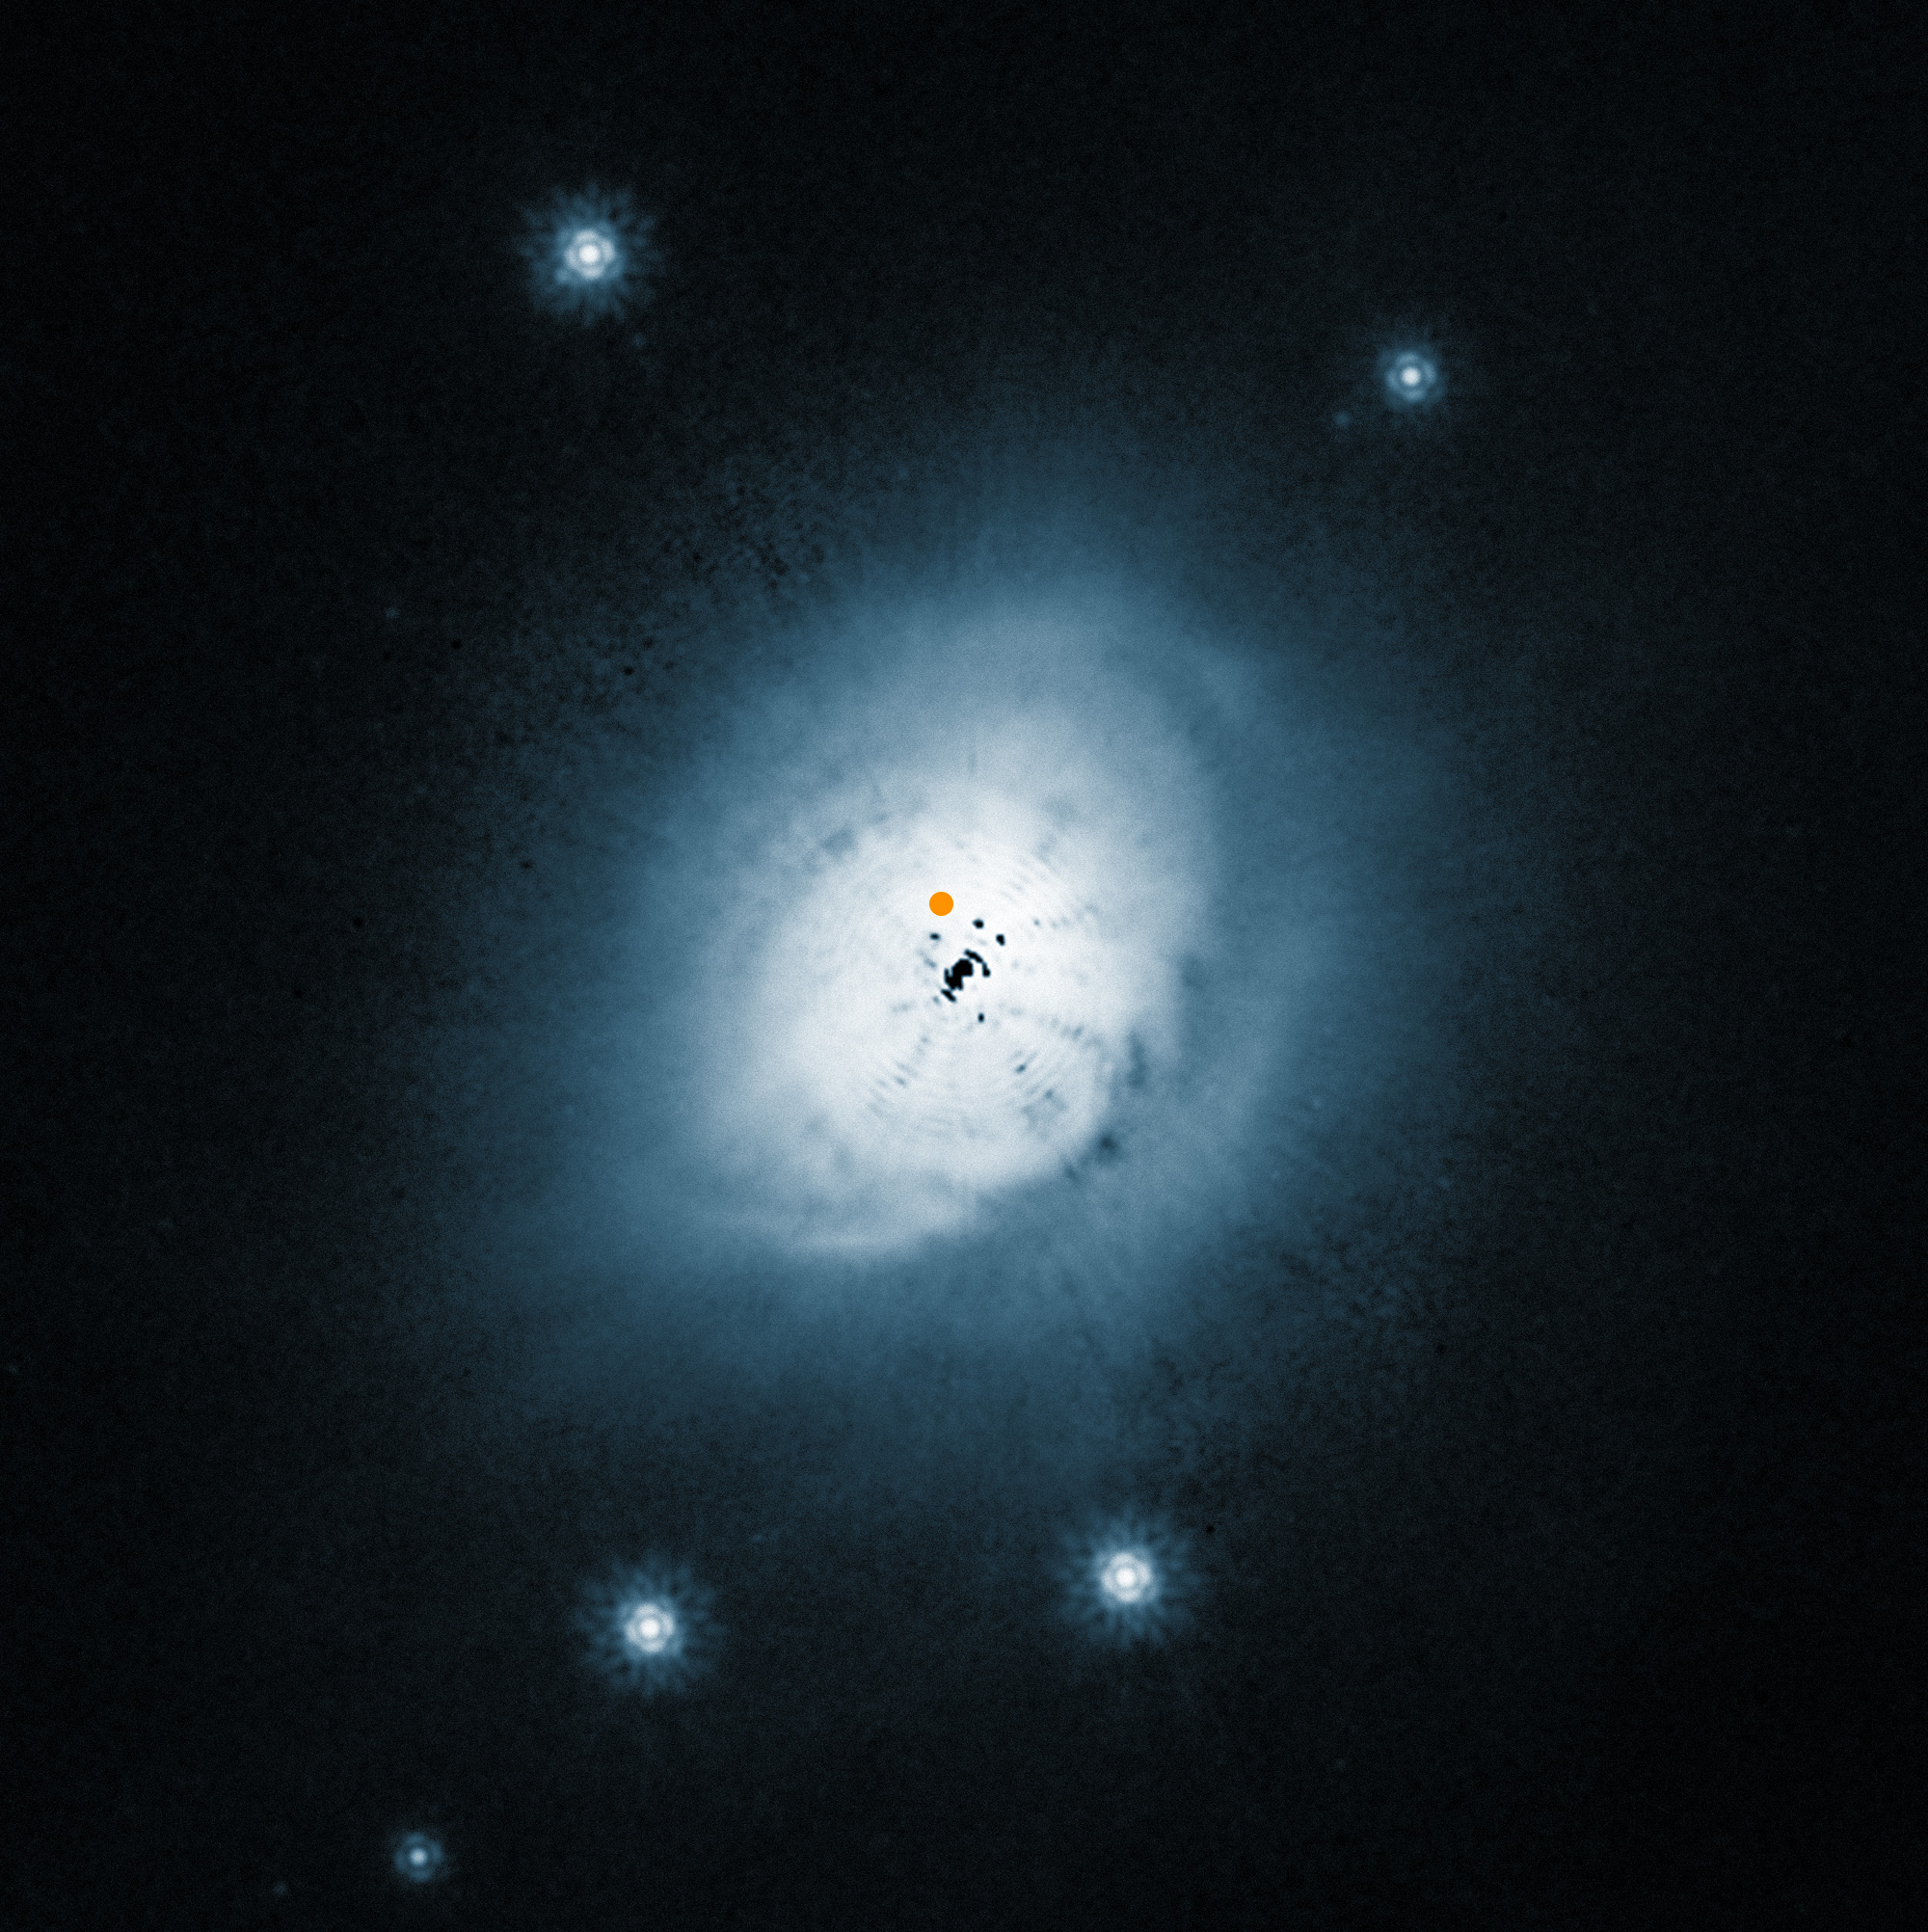 NASA/ESA Hubble Space Telescope view of the dust disc around the young star HD 100546